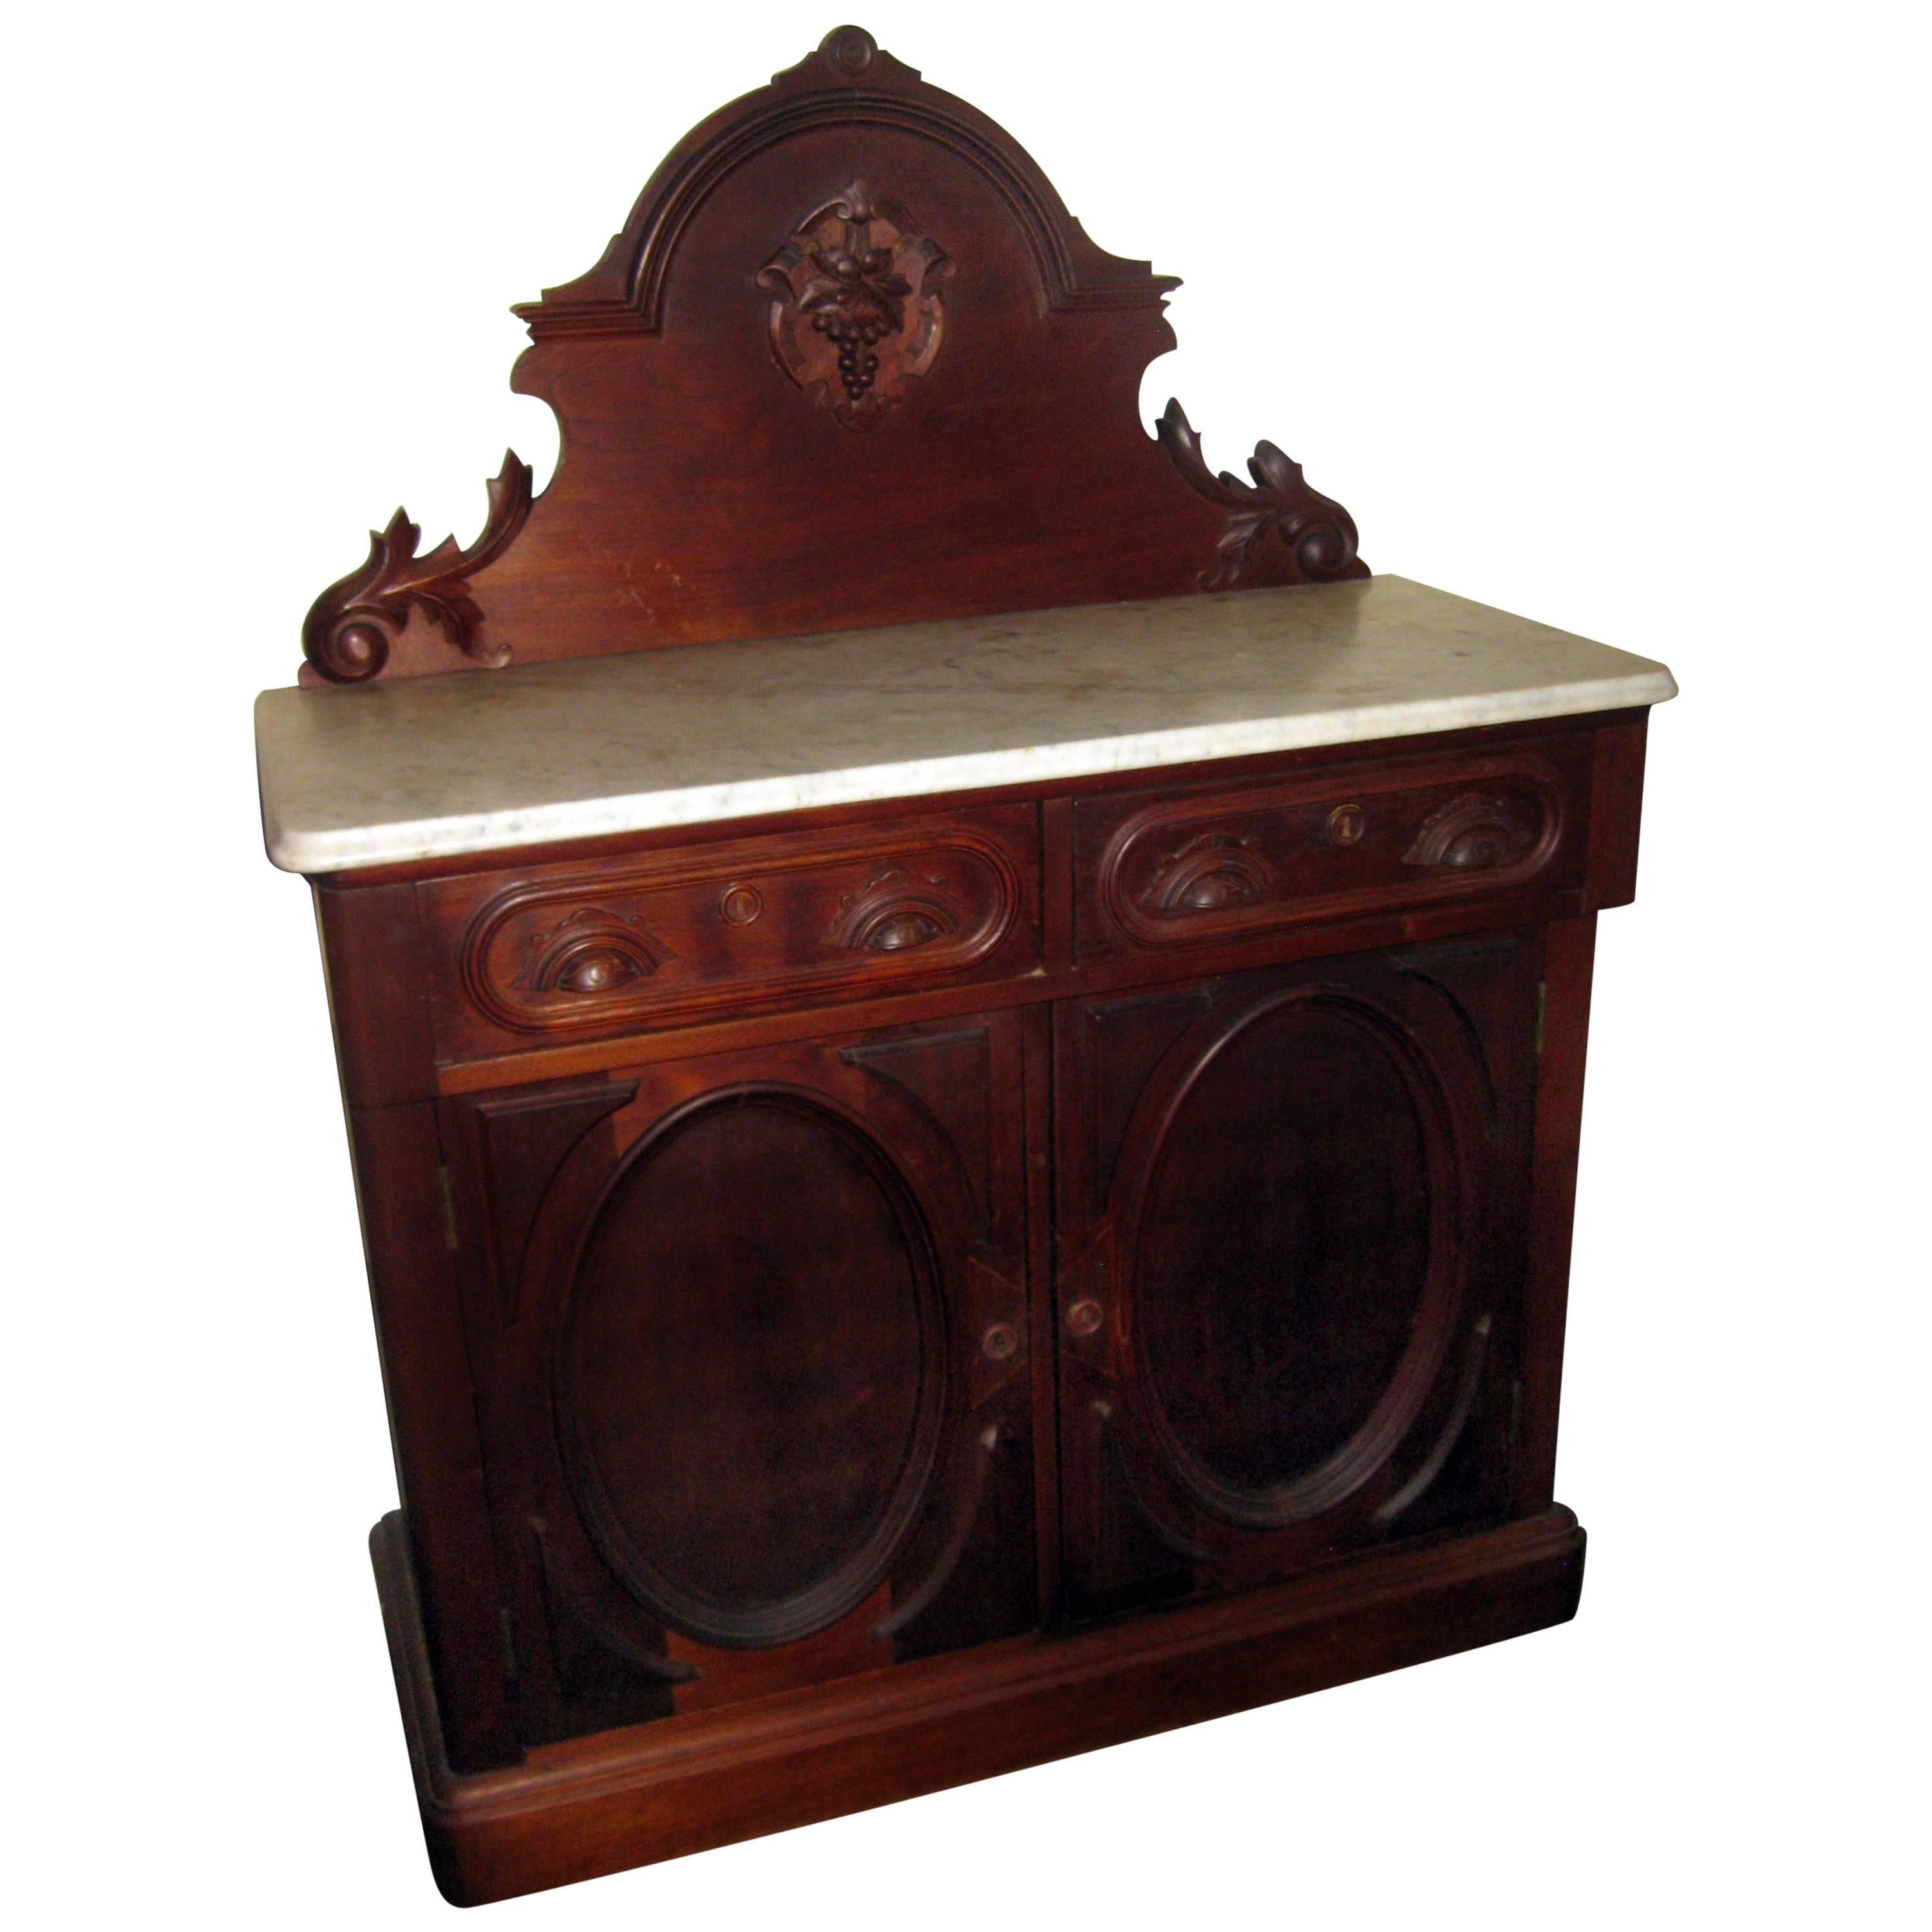 19th century Victorian Walnut Server Sideboard with Marble Top